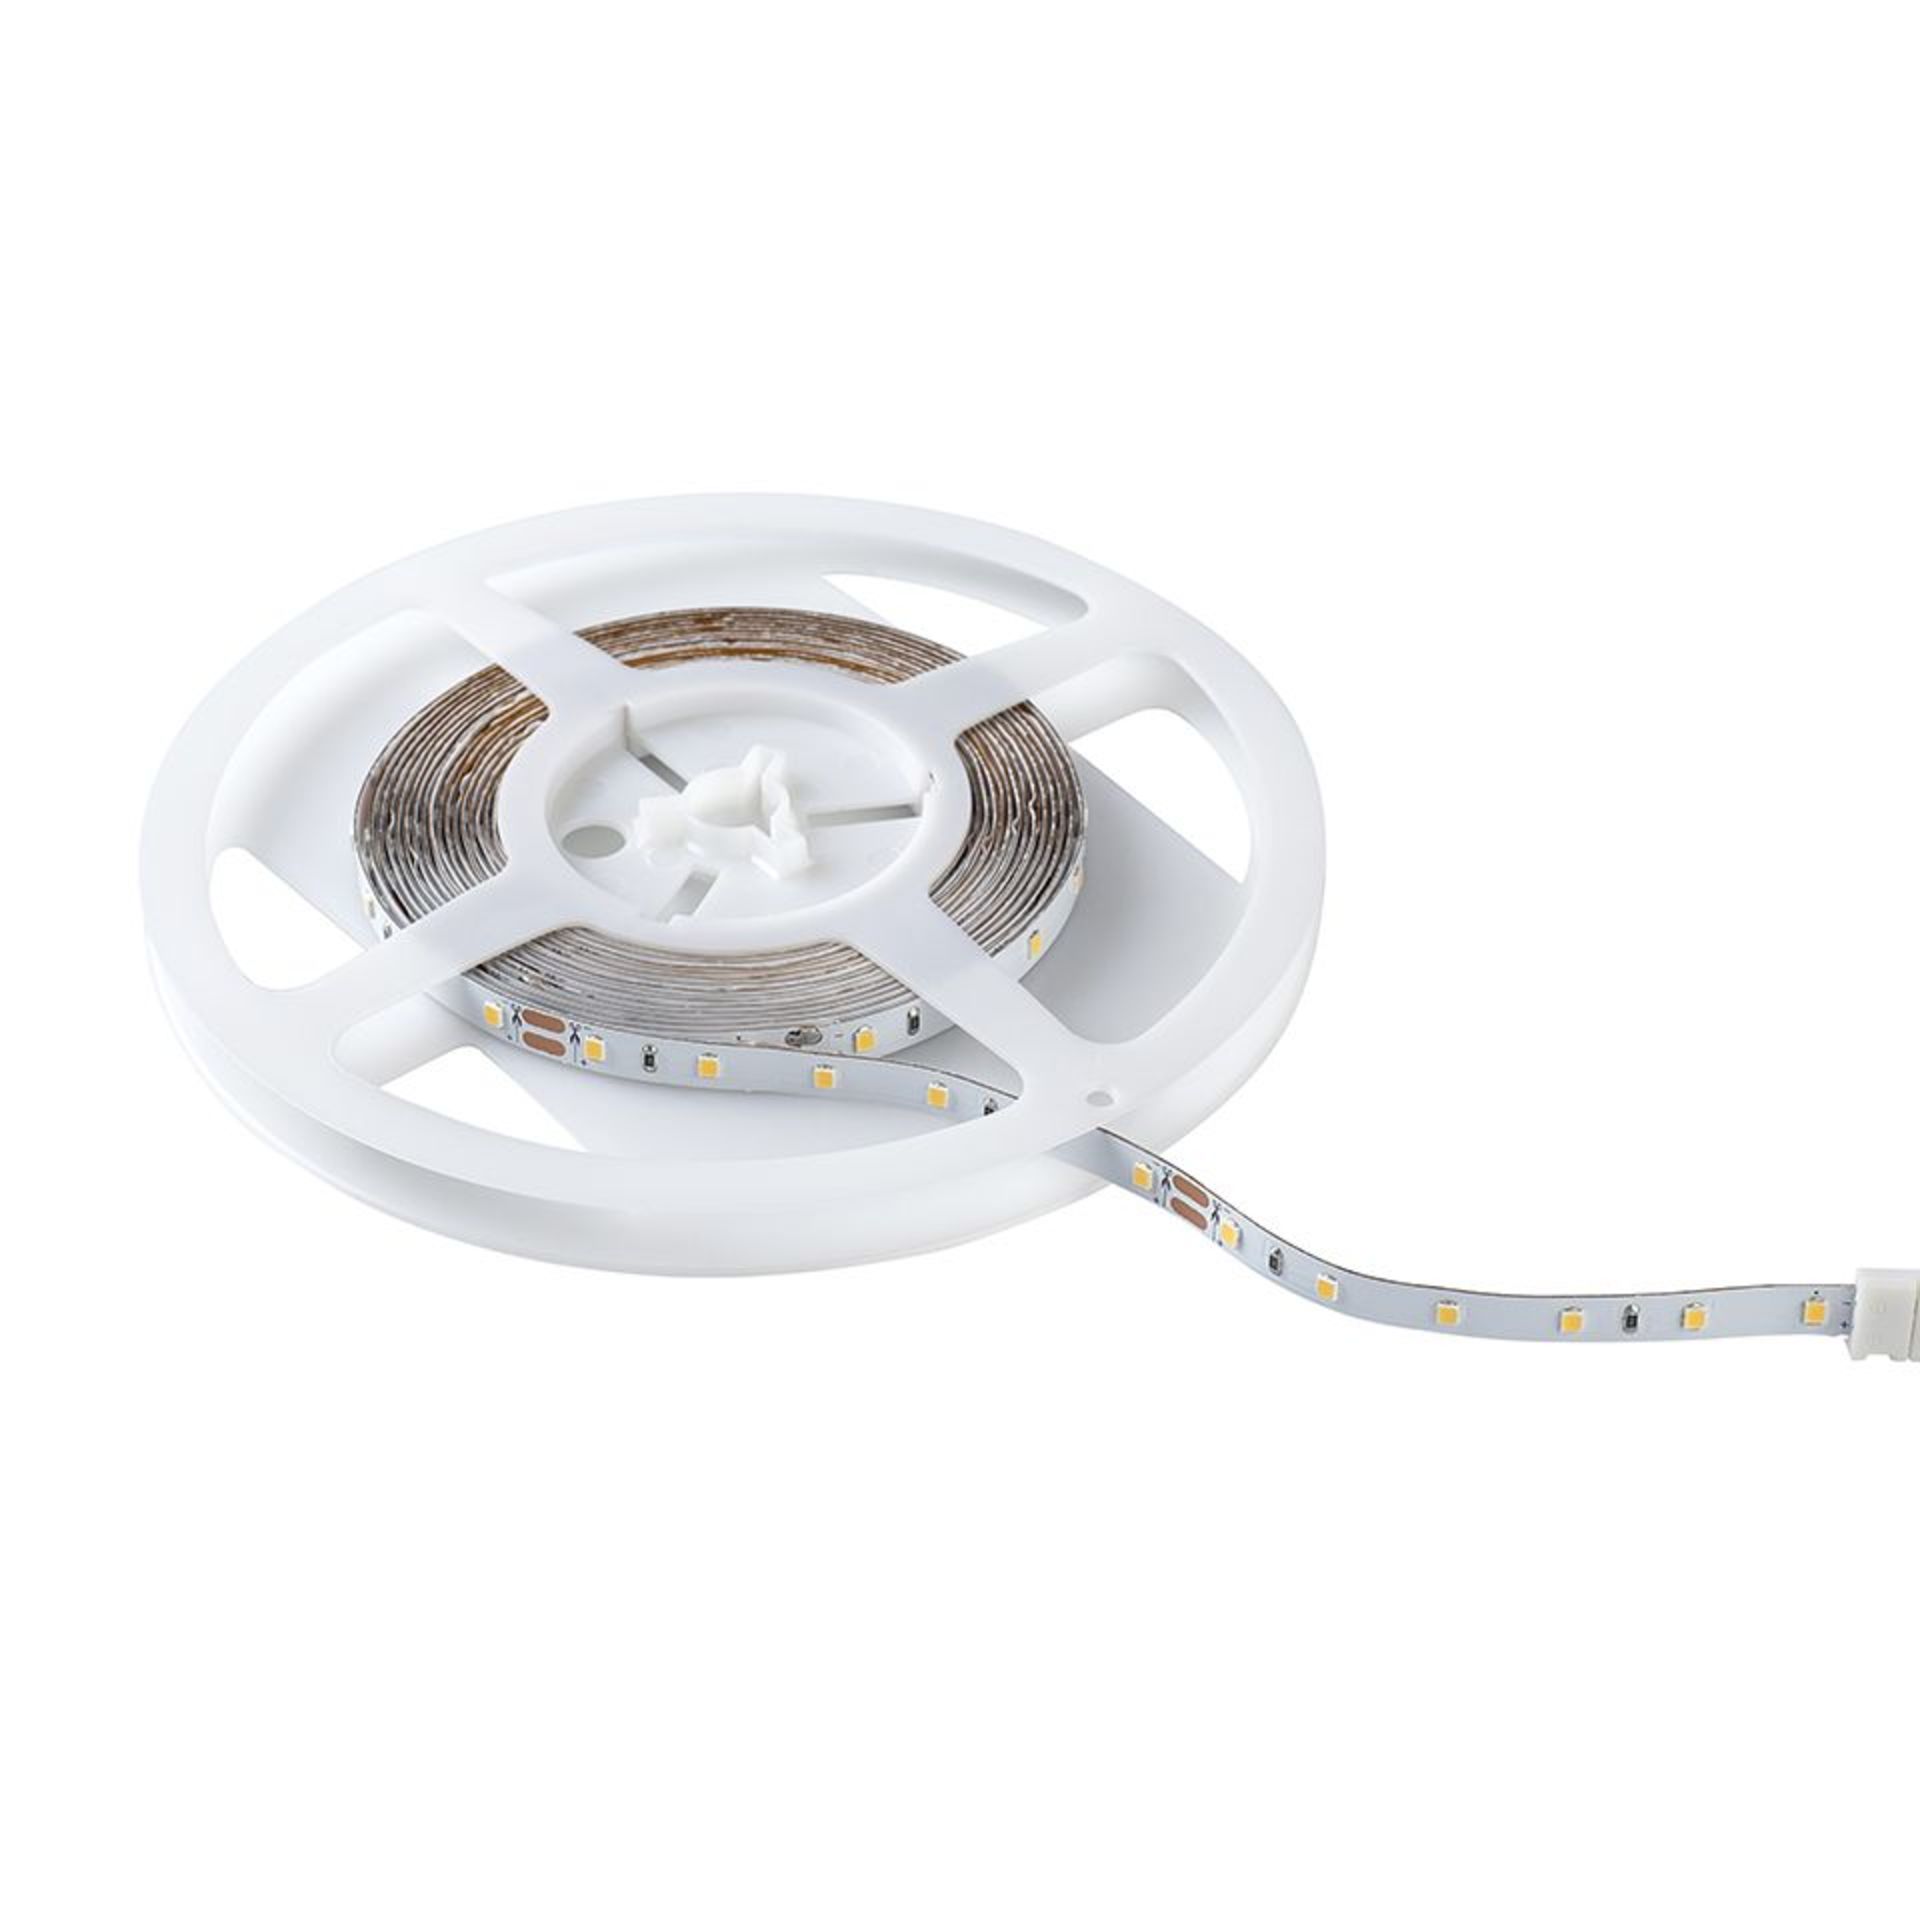 Primo 5m Clip LED Flexible Strip - Warm White The Primo flexible strip light is our longest st... - Image 2 of 2